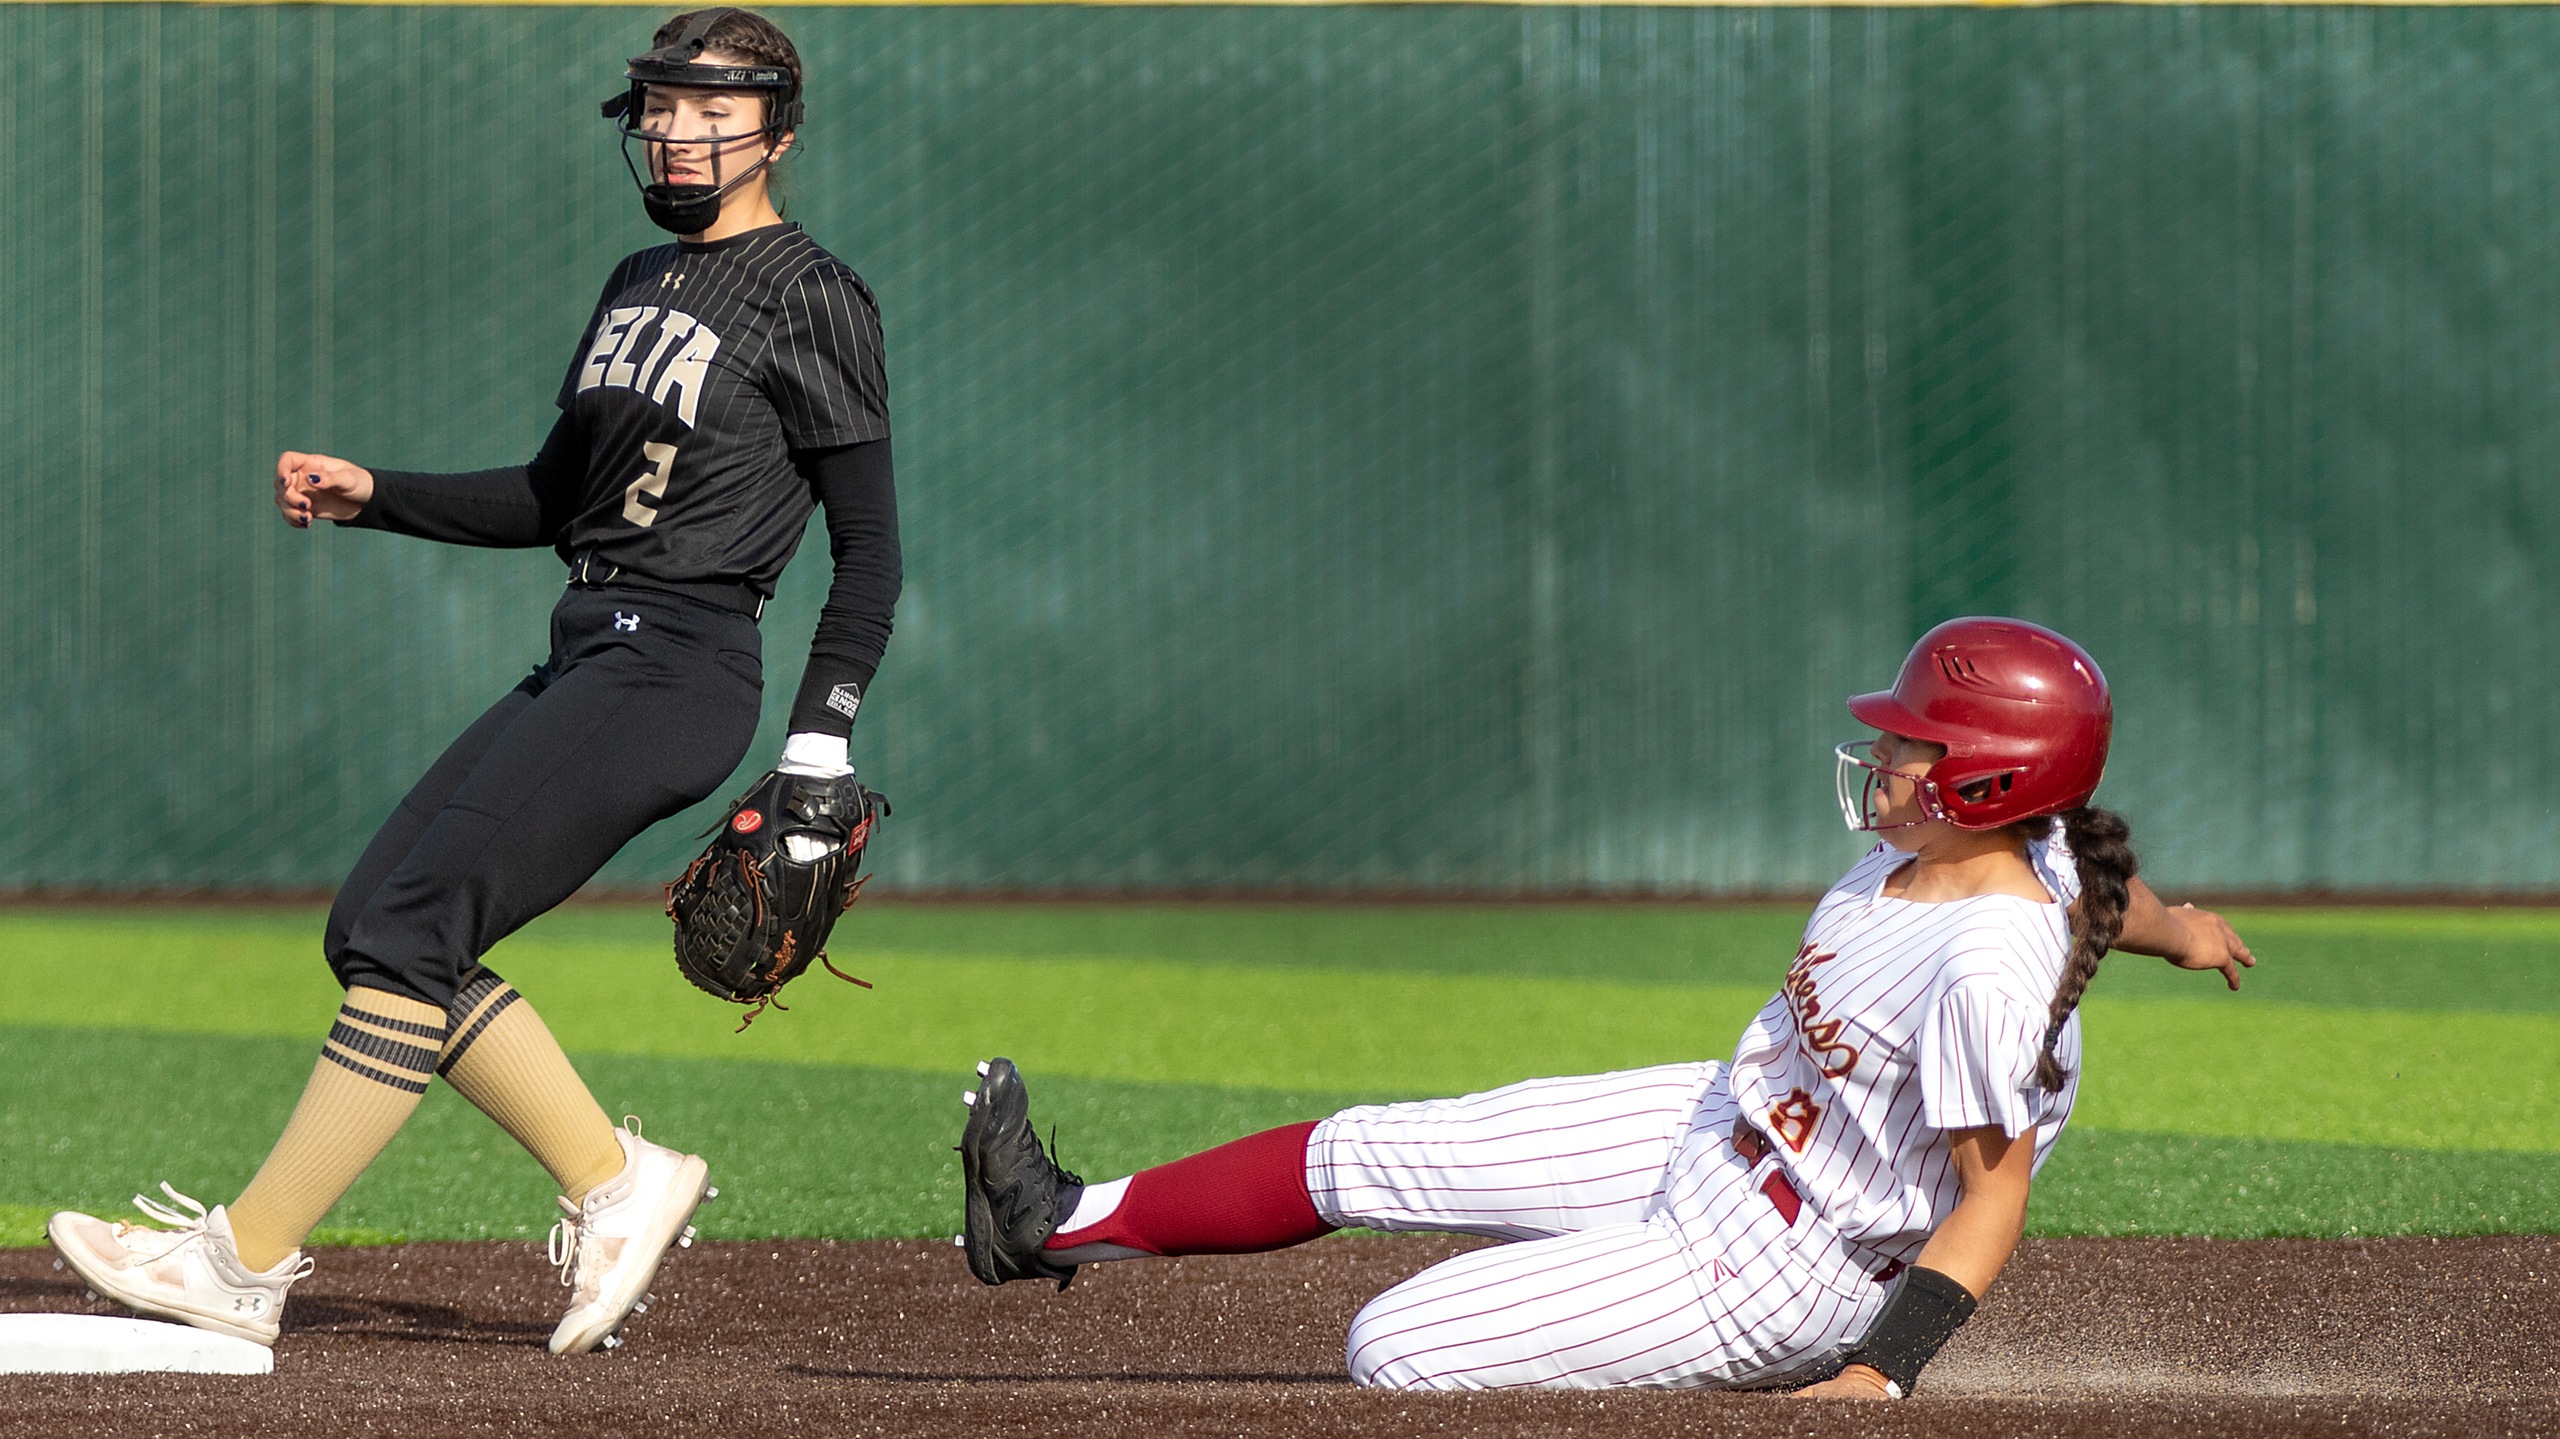 Sac City racks up 10 hits, but strands 13 baserunners as they lose 4-3 to the host Cougars; Potter, Garber and Zlatunich all have 2 hits in the game